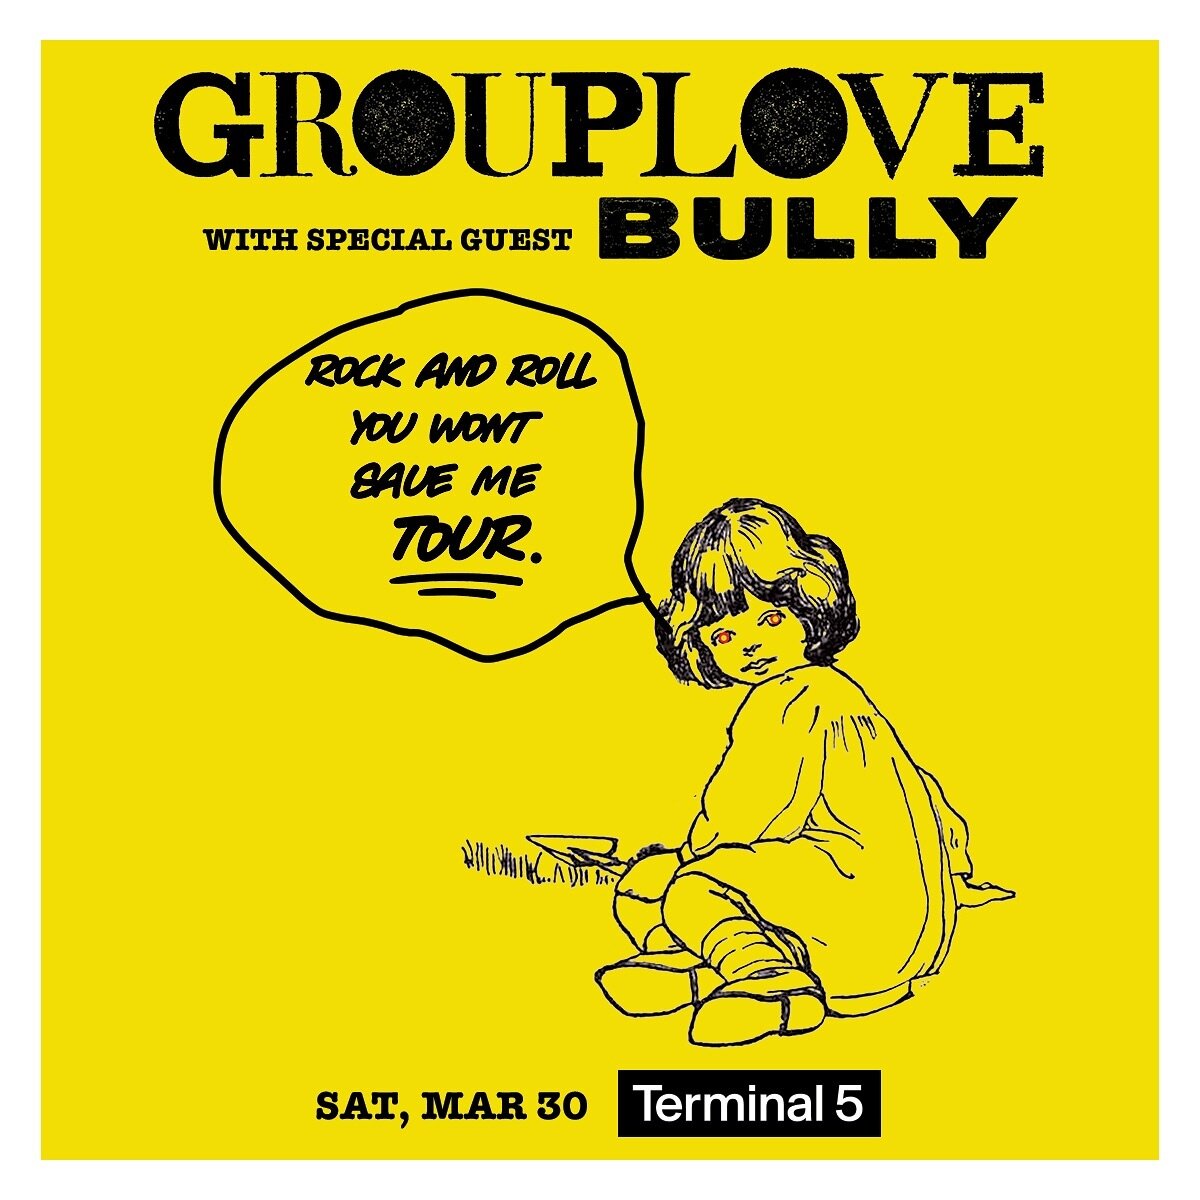 ✨GIVEAWAY✨ Thanks to our friends @bowerypresents we have 2x tix to giveaway for the incredibly talented @grouplove show this Saturday March 30 at @terminal5nyc ✨Comment Below &ldquo;I Want It All Right Now&rdquo; to enter ✨Winner announced March 28th